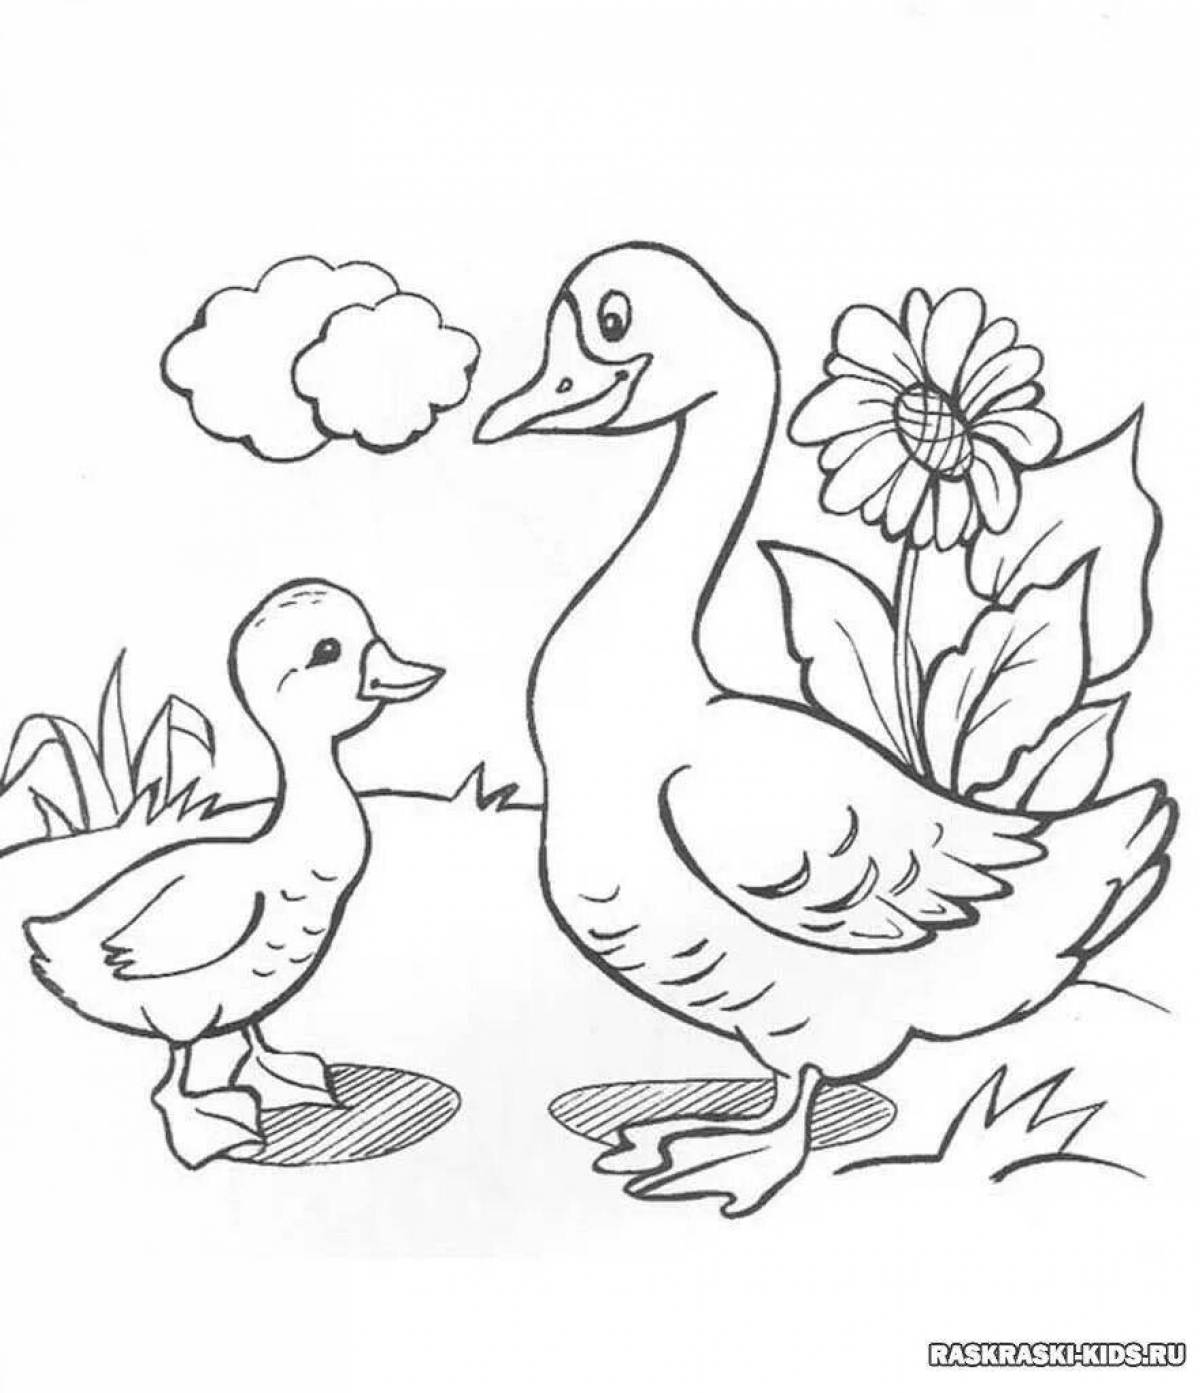 Silly goose hug coloring page